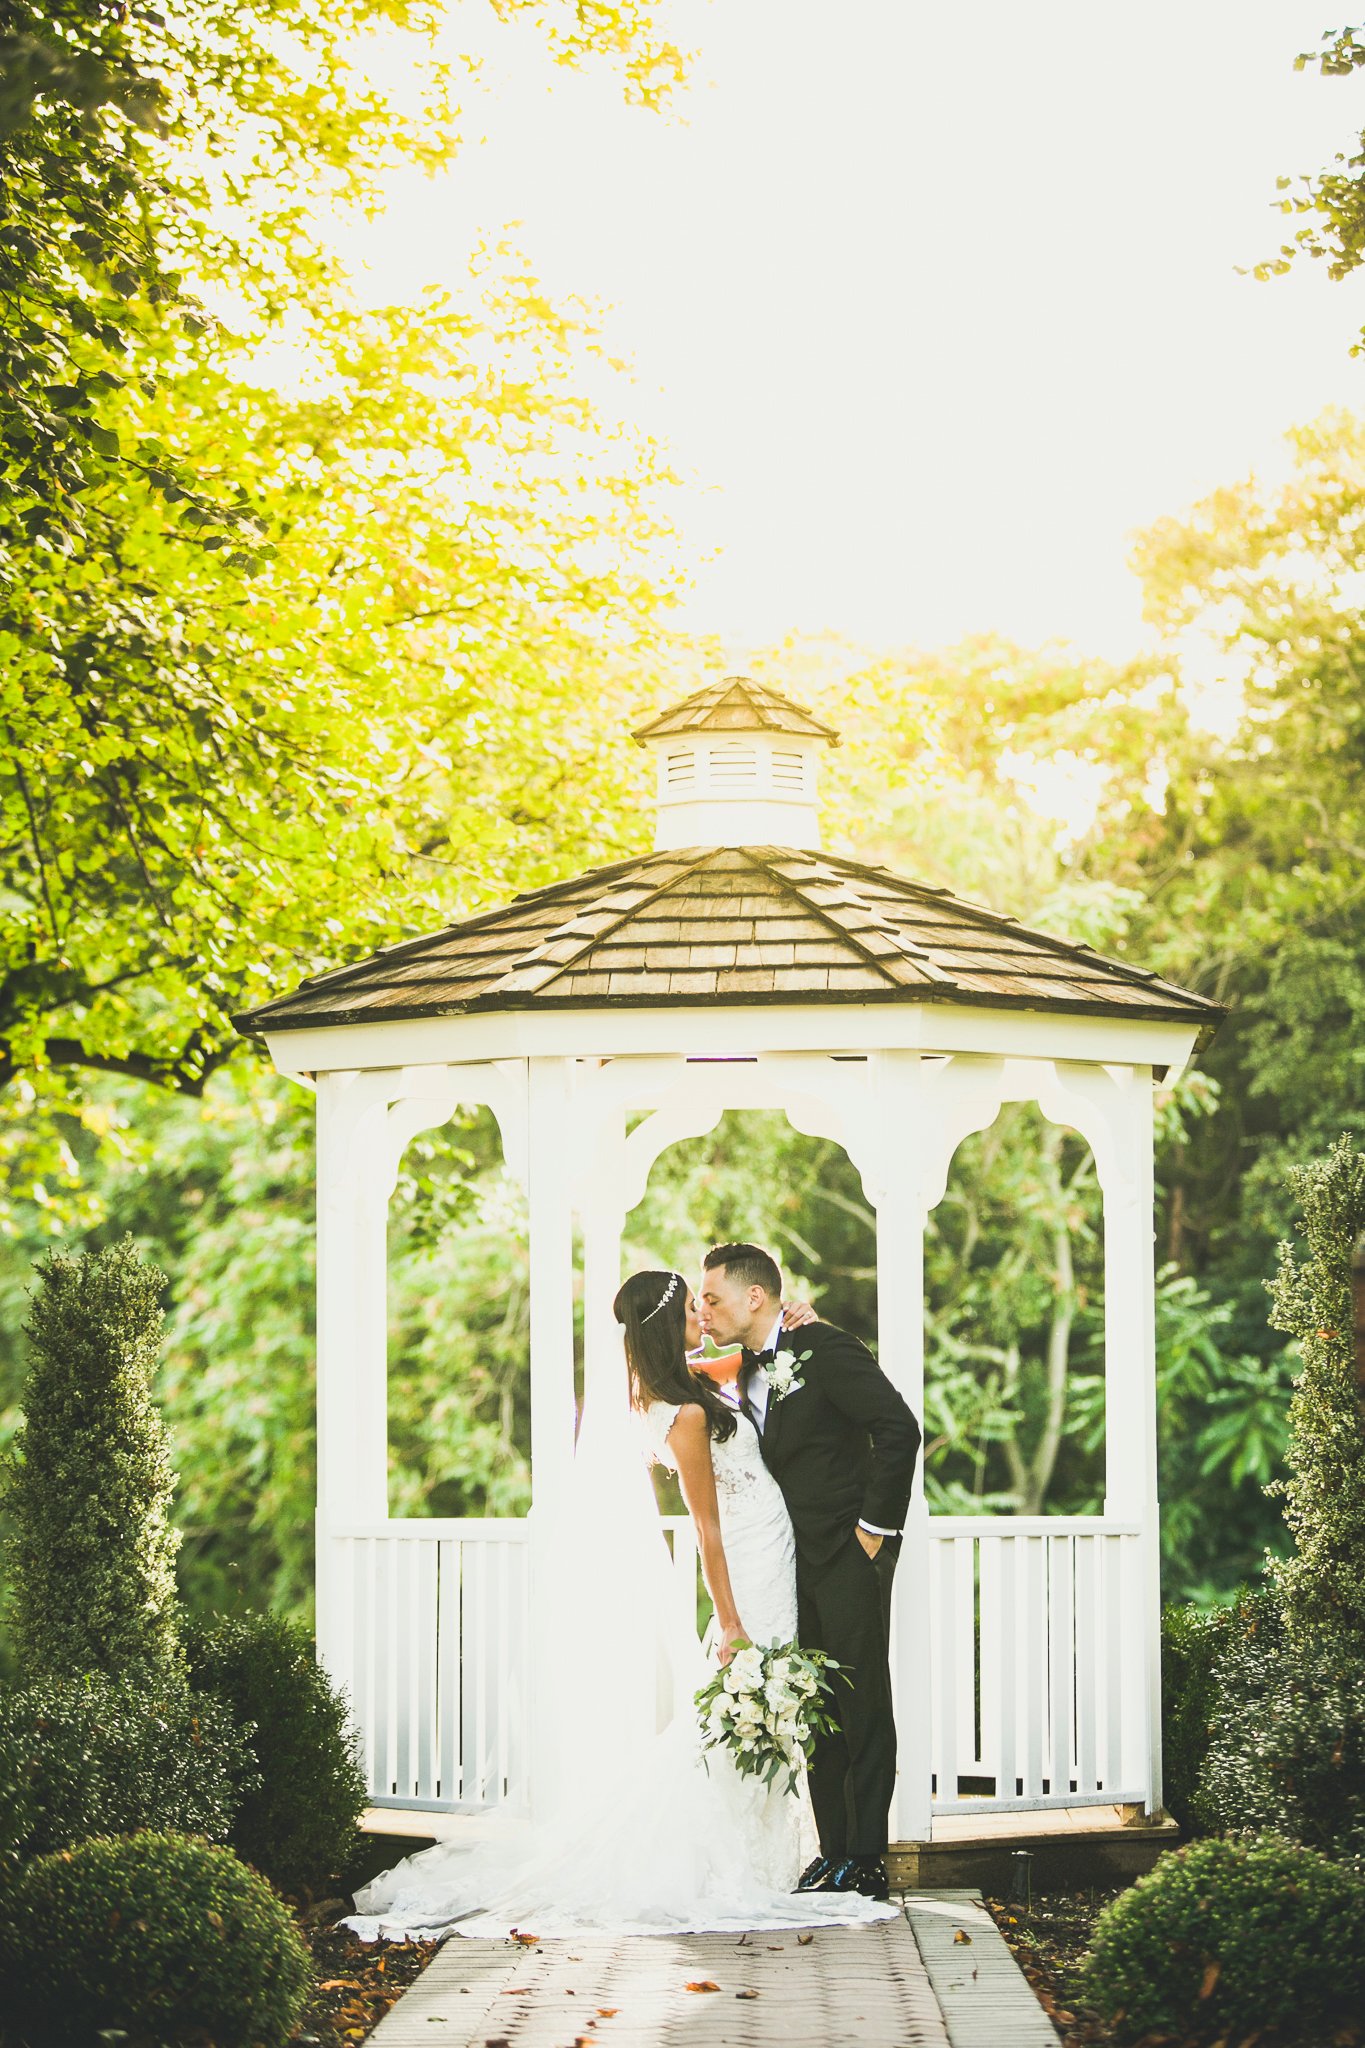 Light and Airy Wedding Photos taken at The Mansion at Oyster Bay